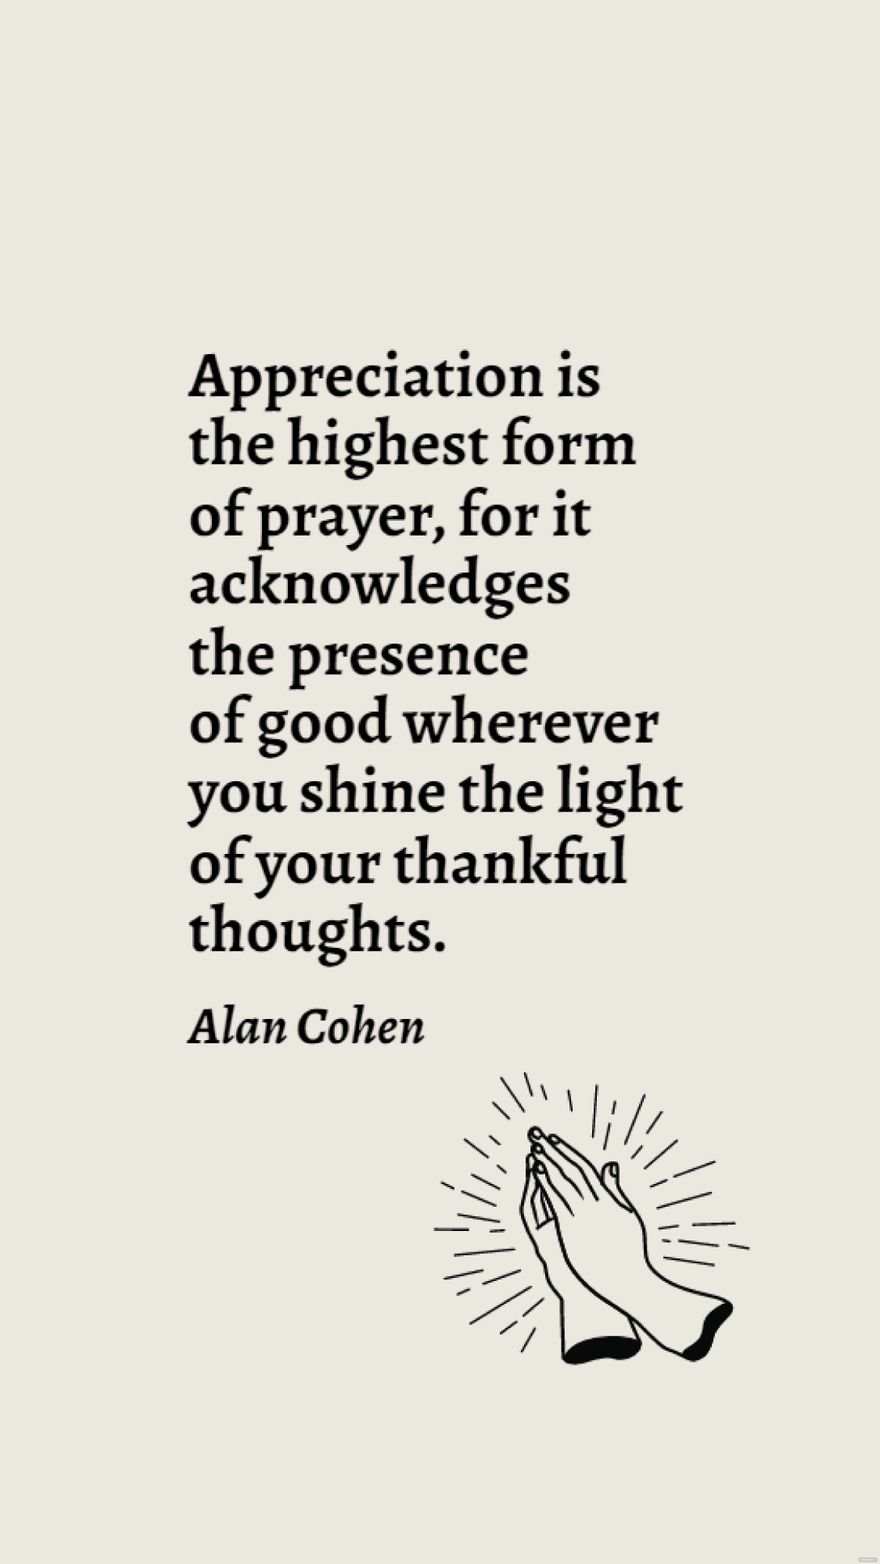 Free Alan Cohen - Appreciation is the highest form of prayer, for it acknowledges the presence of good wherever you shine the light of your thankful thoughts.